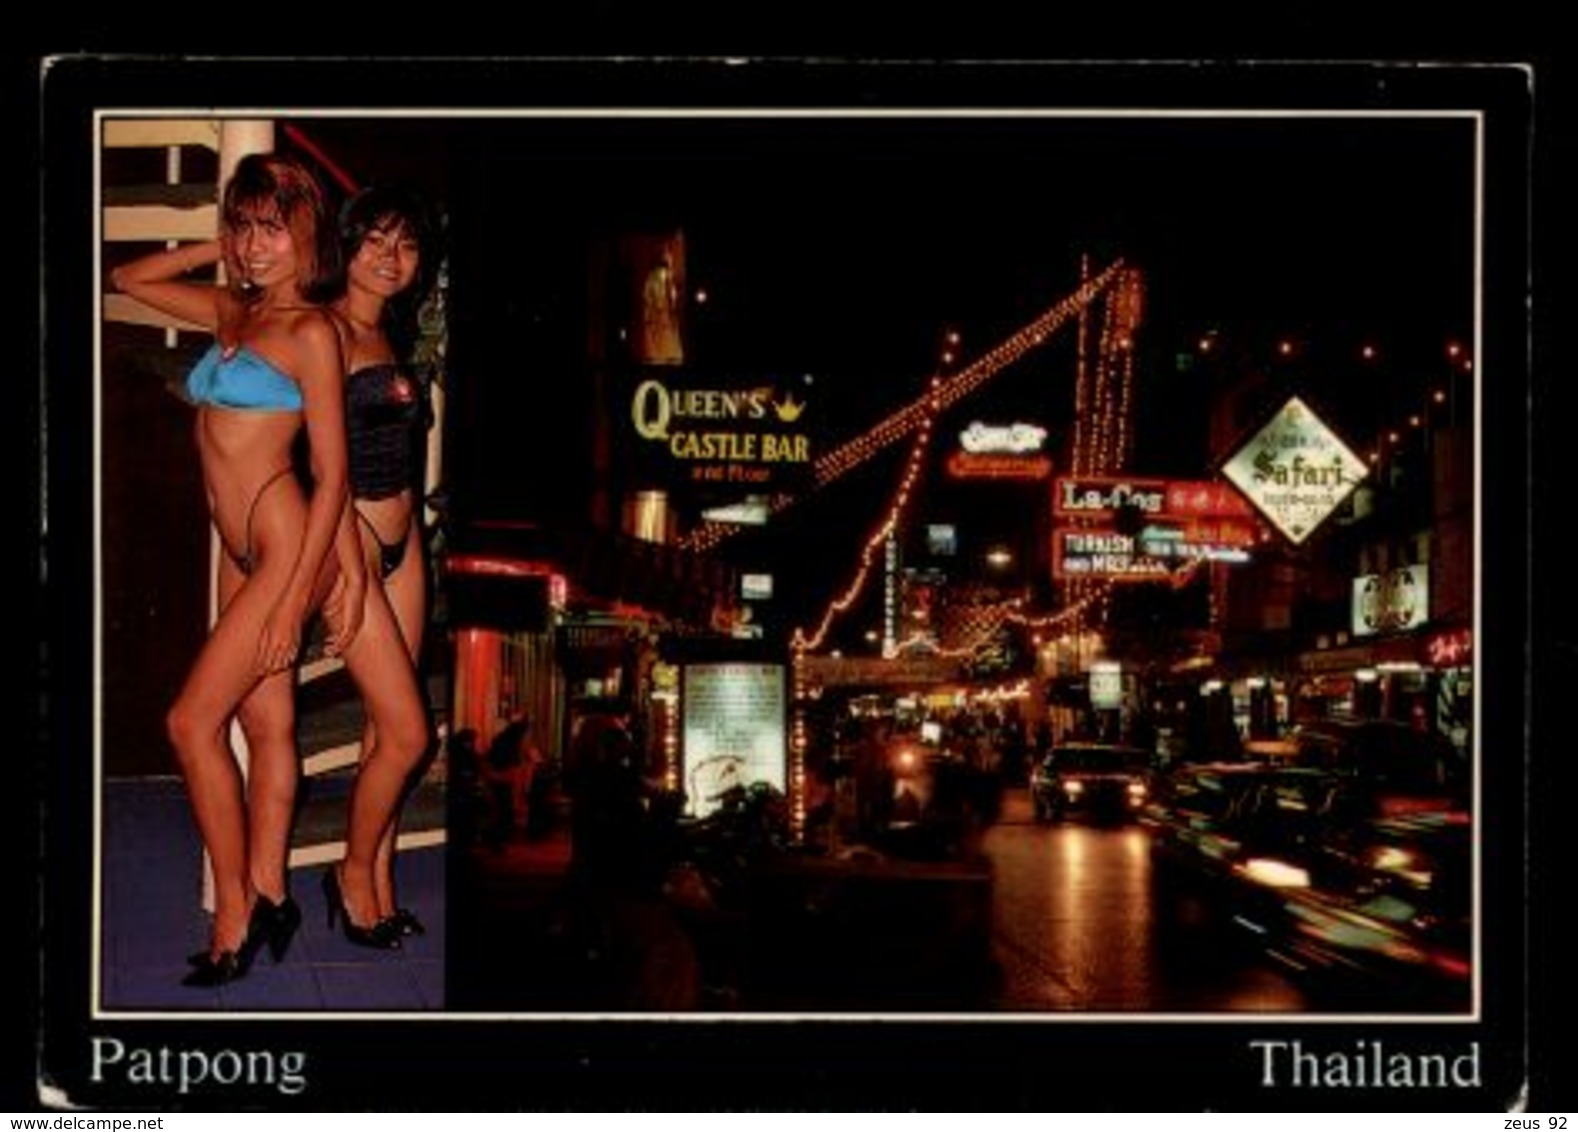 C362 THAILAND - BANGKOK - PATPONG BY NIGHT WITH QUEEN'S CASTLE BAR NIGHTLIFE PIN UP SEXY NUDE FEMME WOMAN - Tailandia